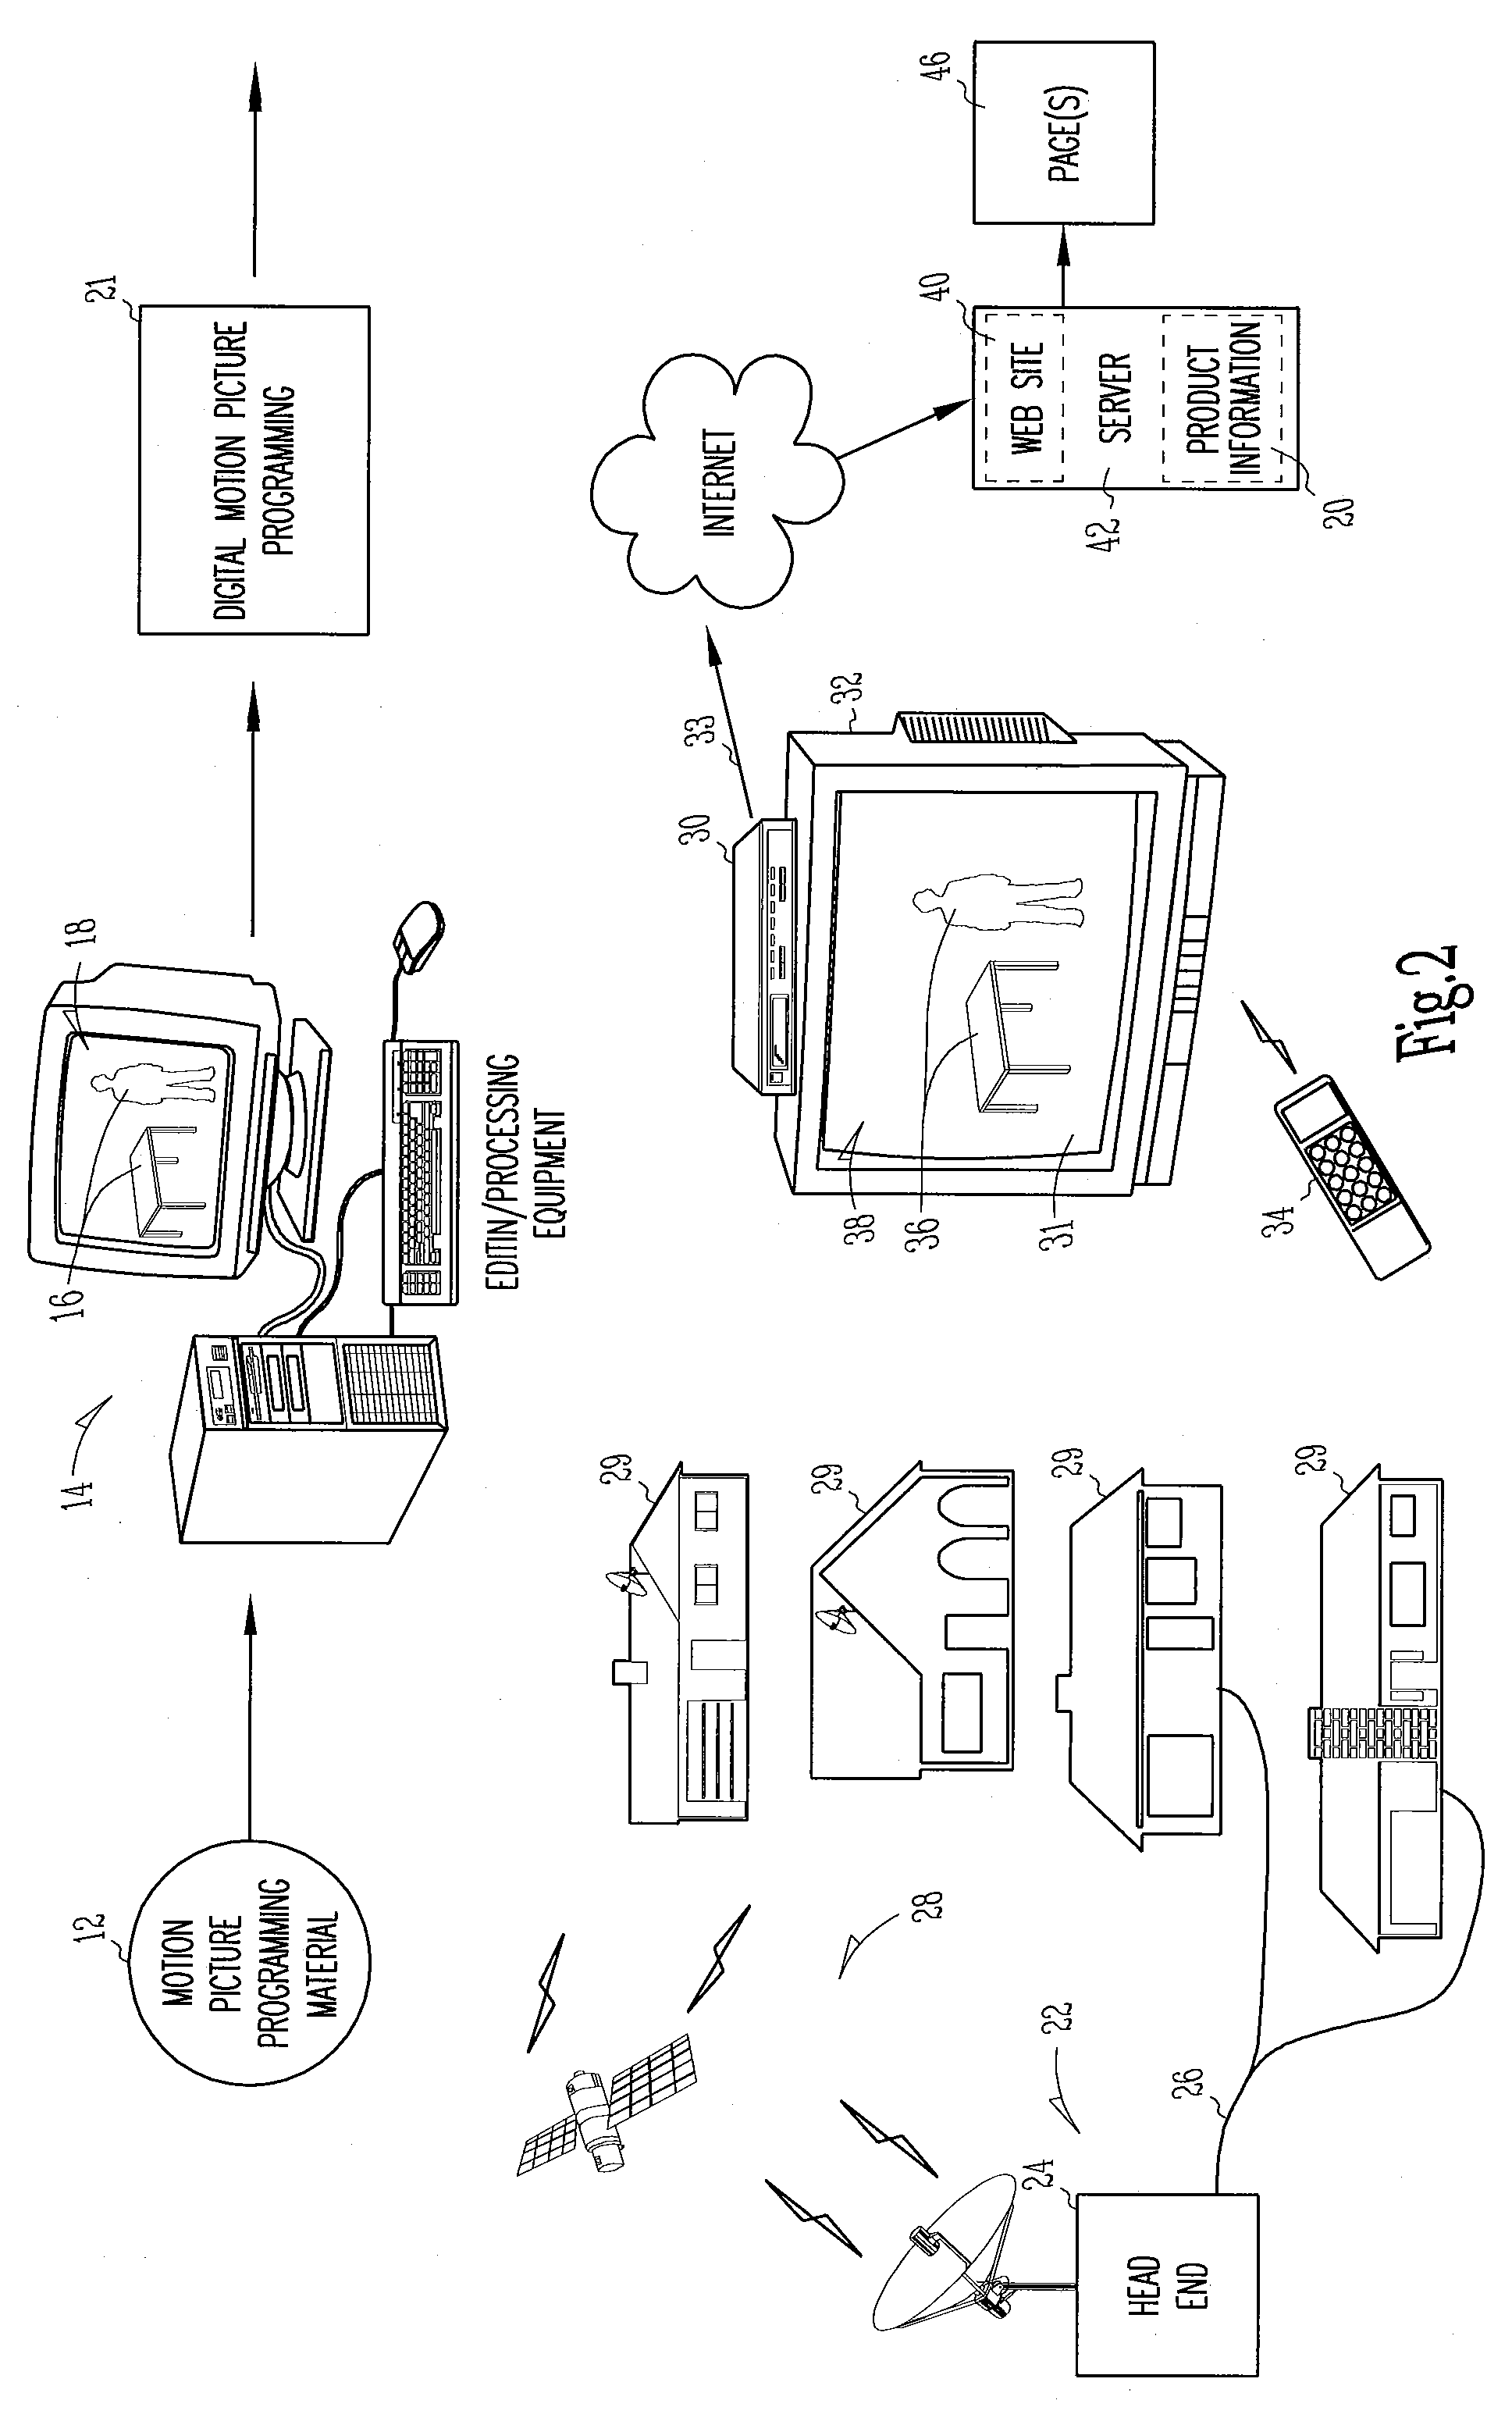 Method and apparatus for digital shopping